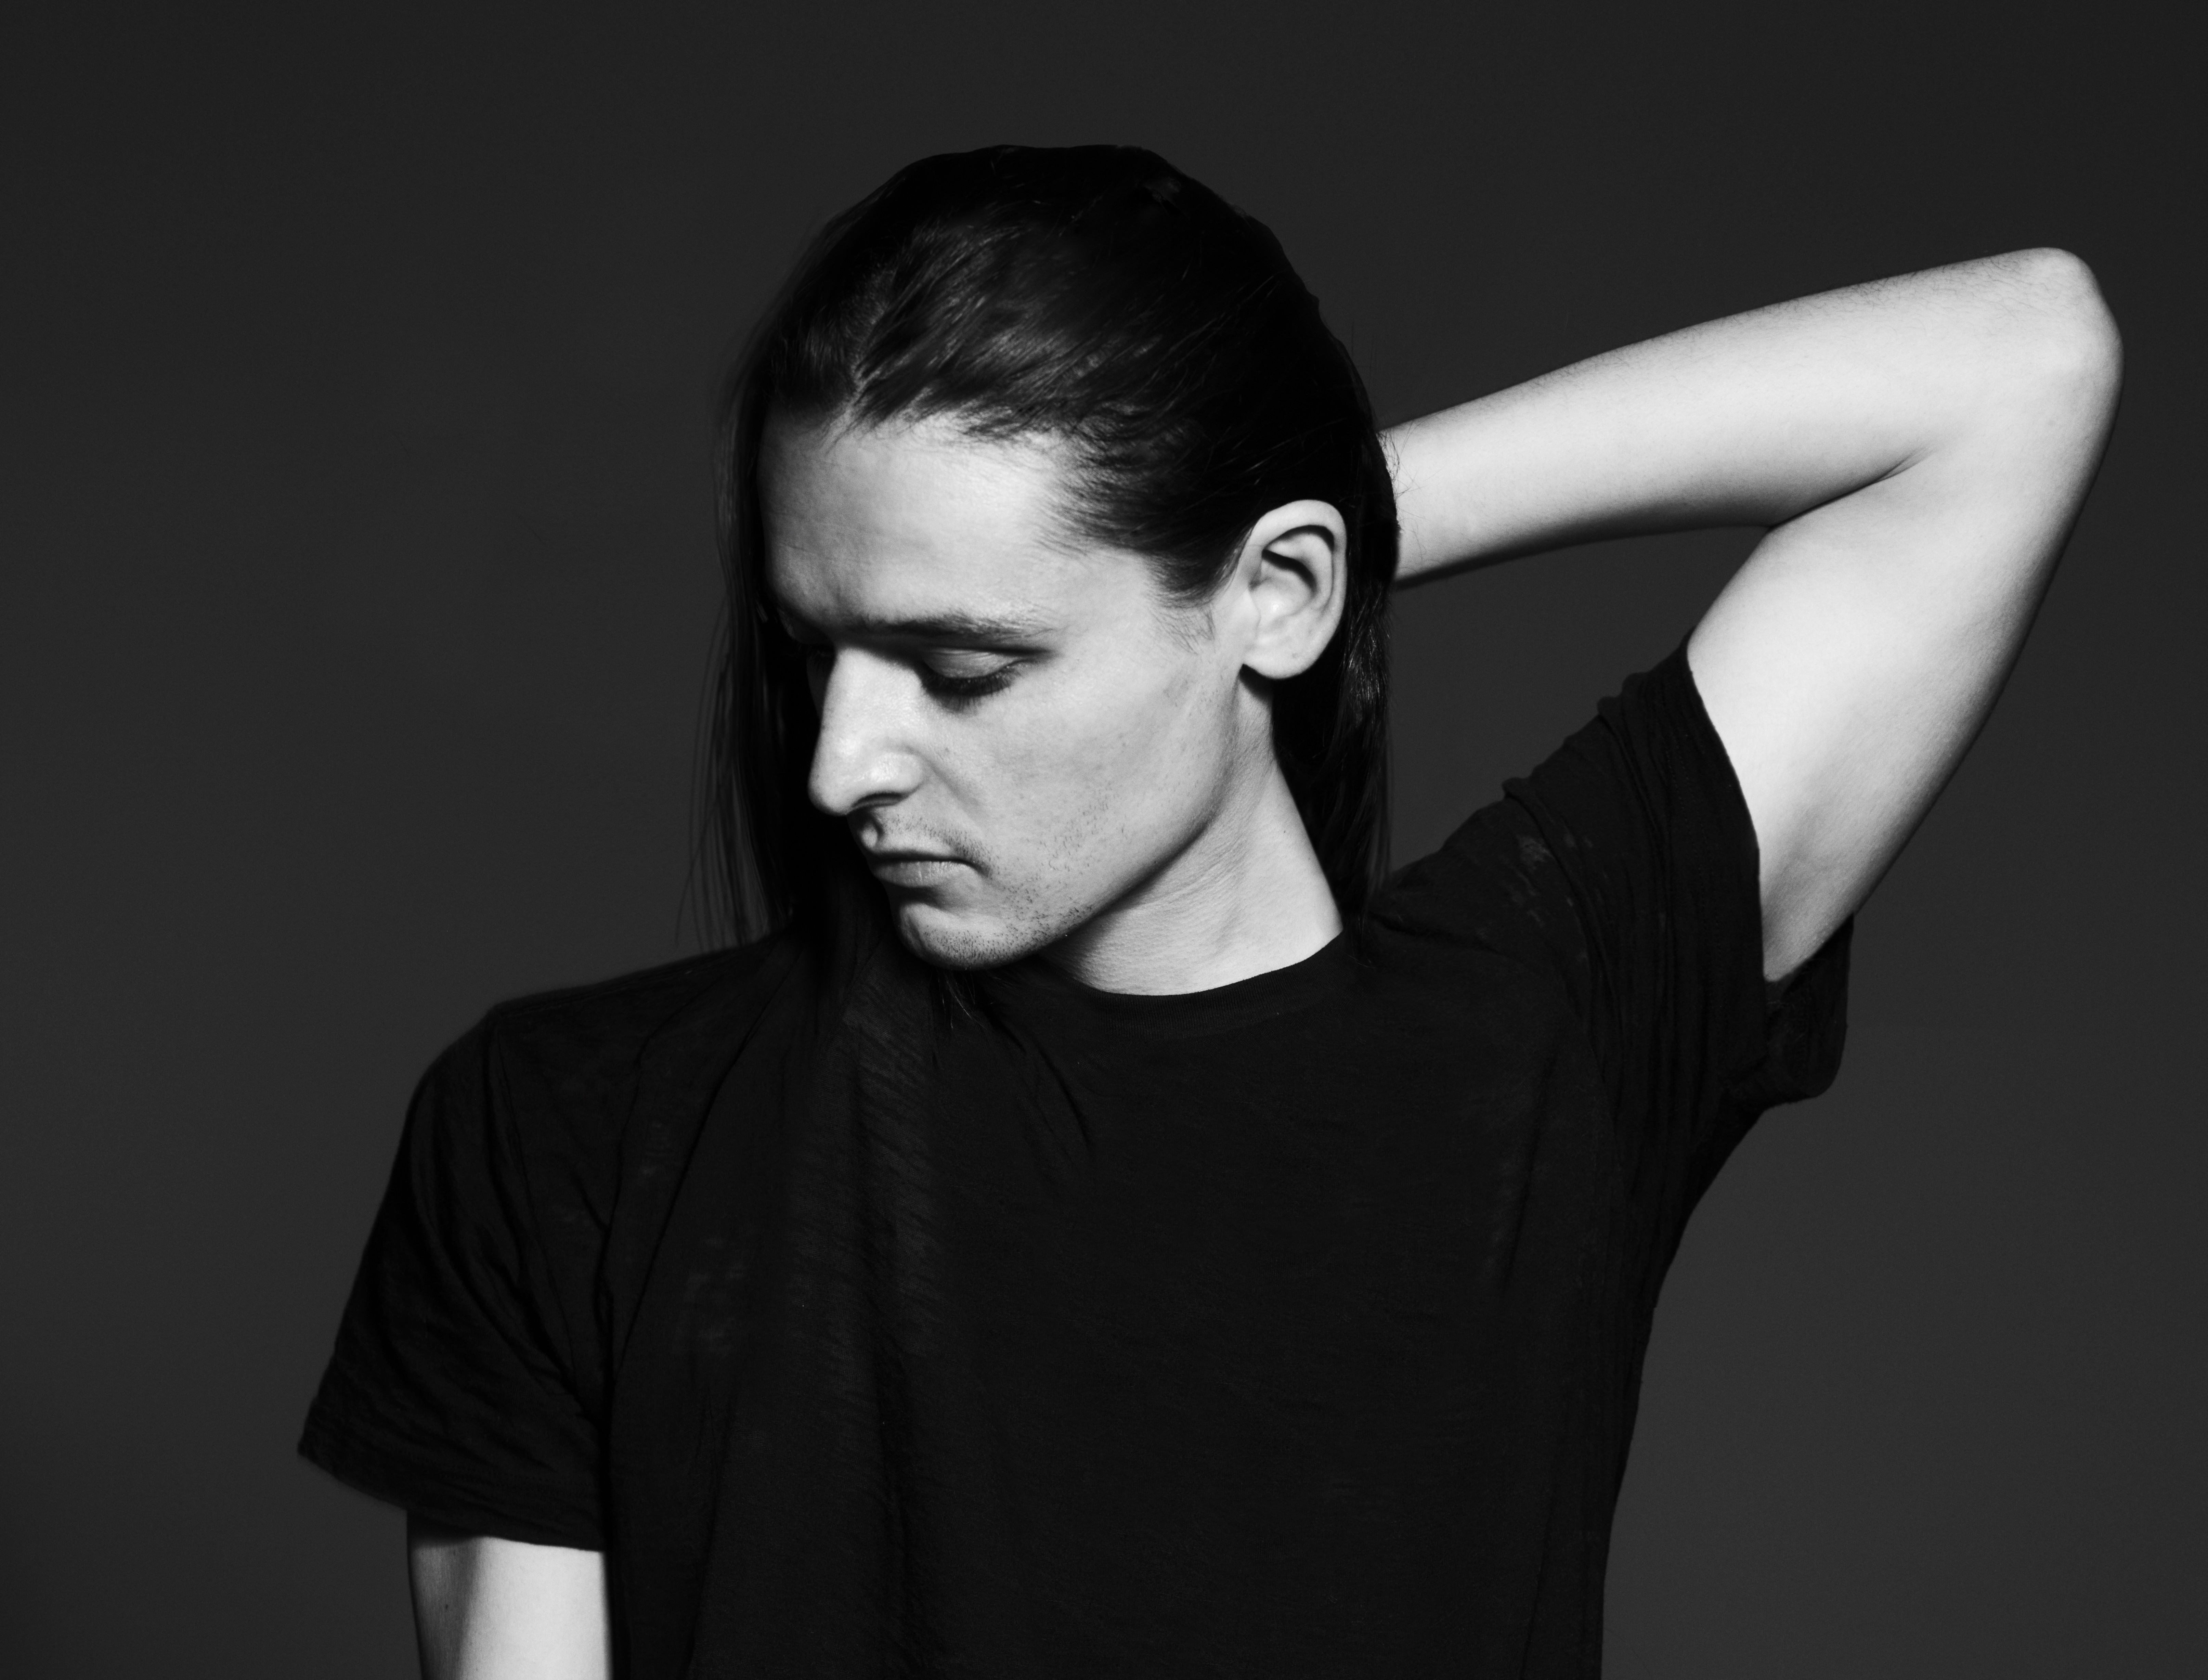 Belgian fashion designer Olivier Theyskens believes in freedom without constraint